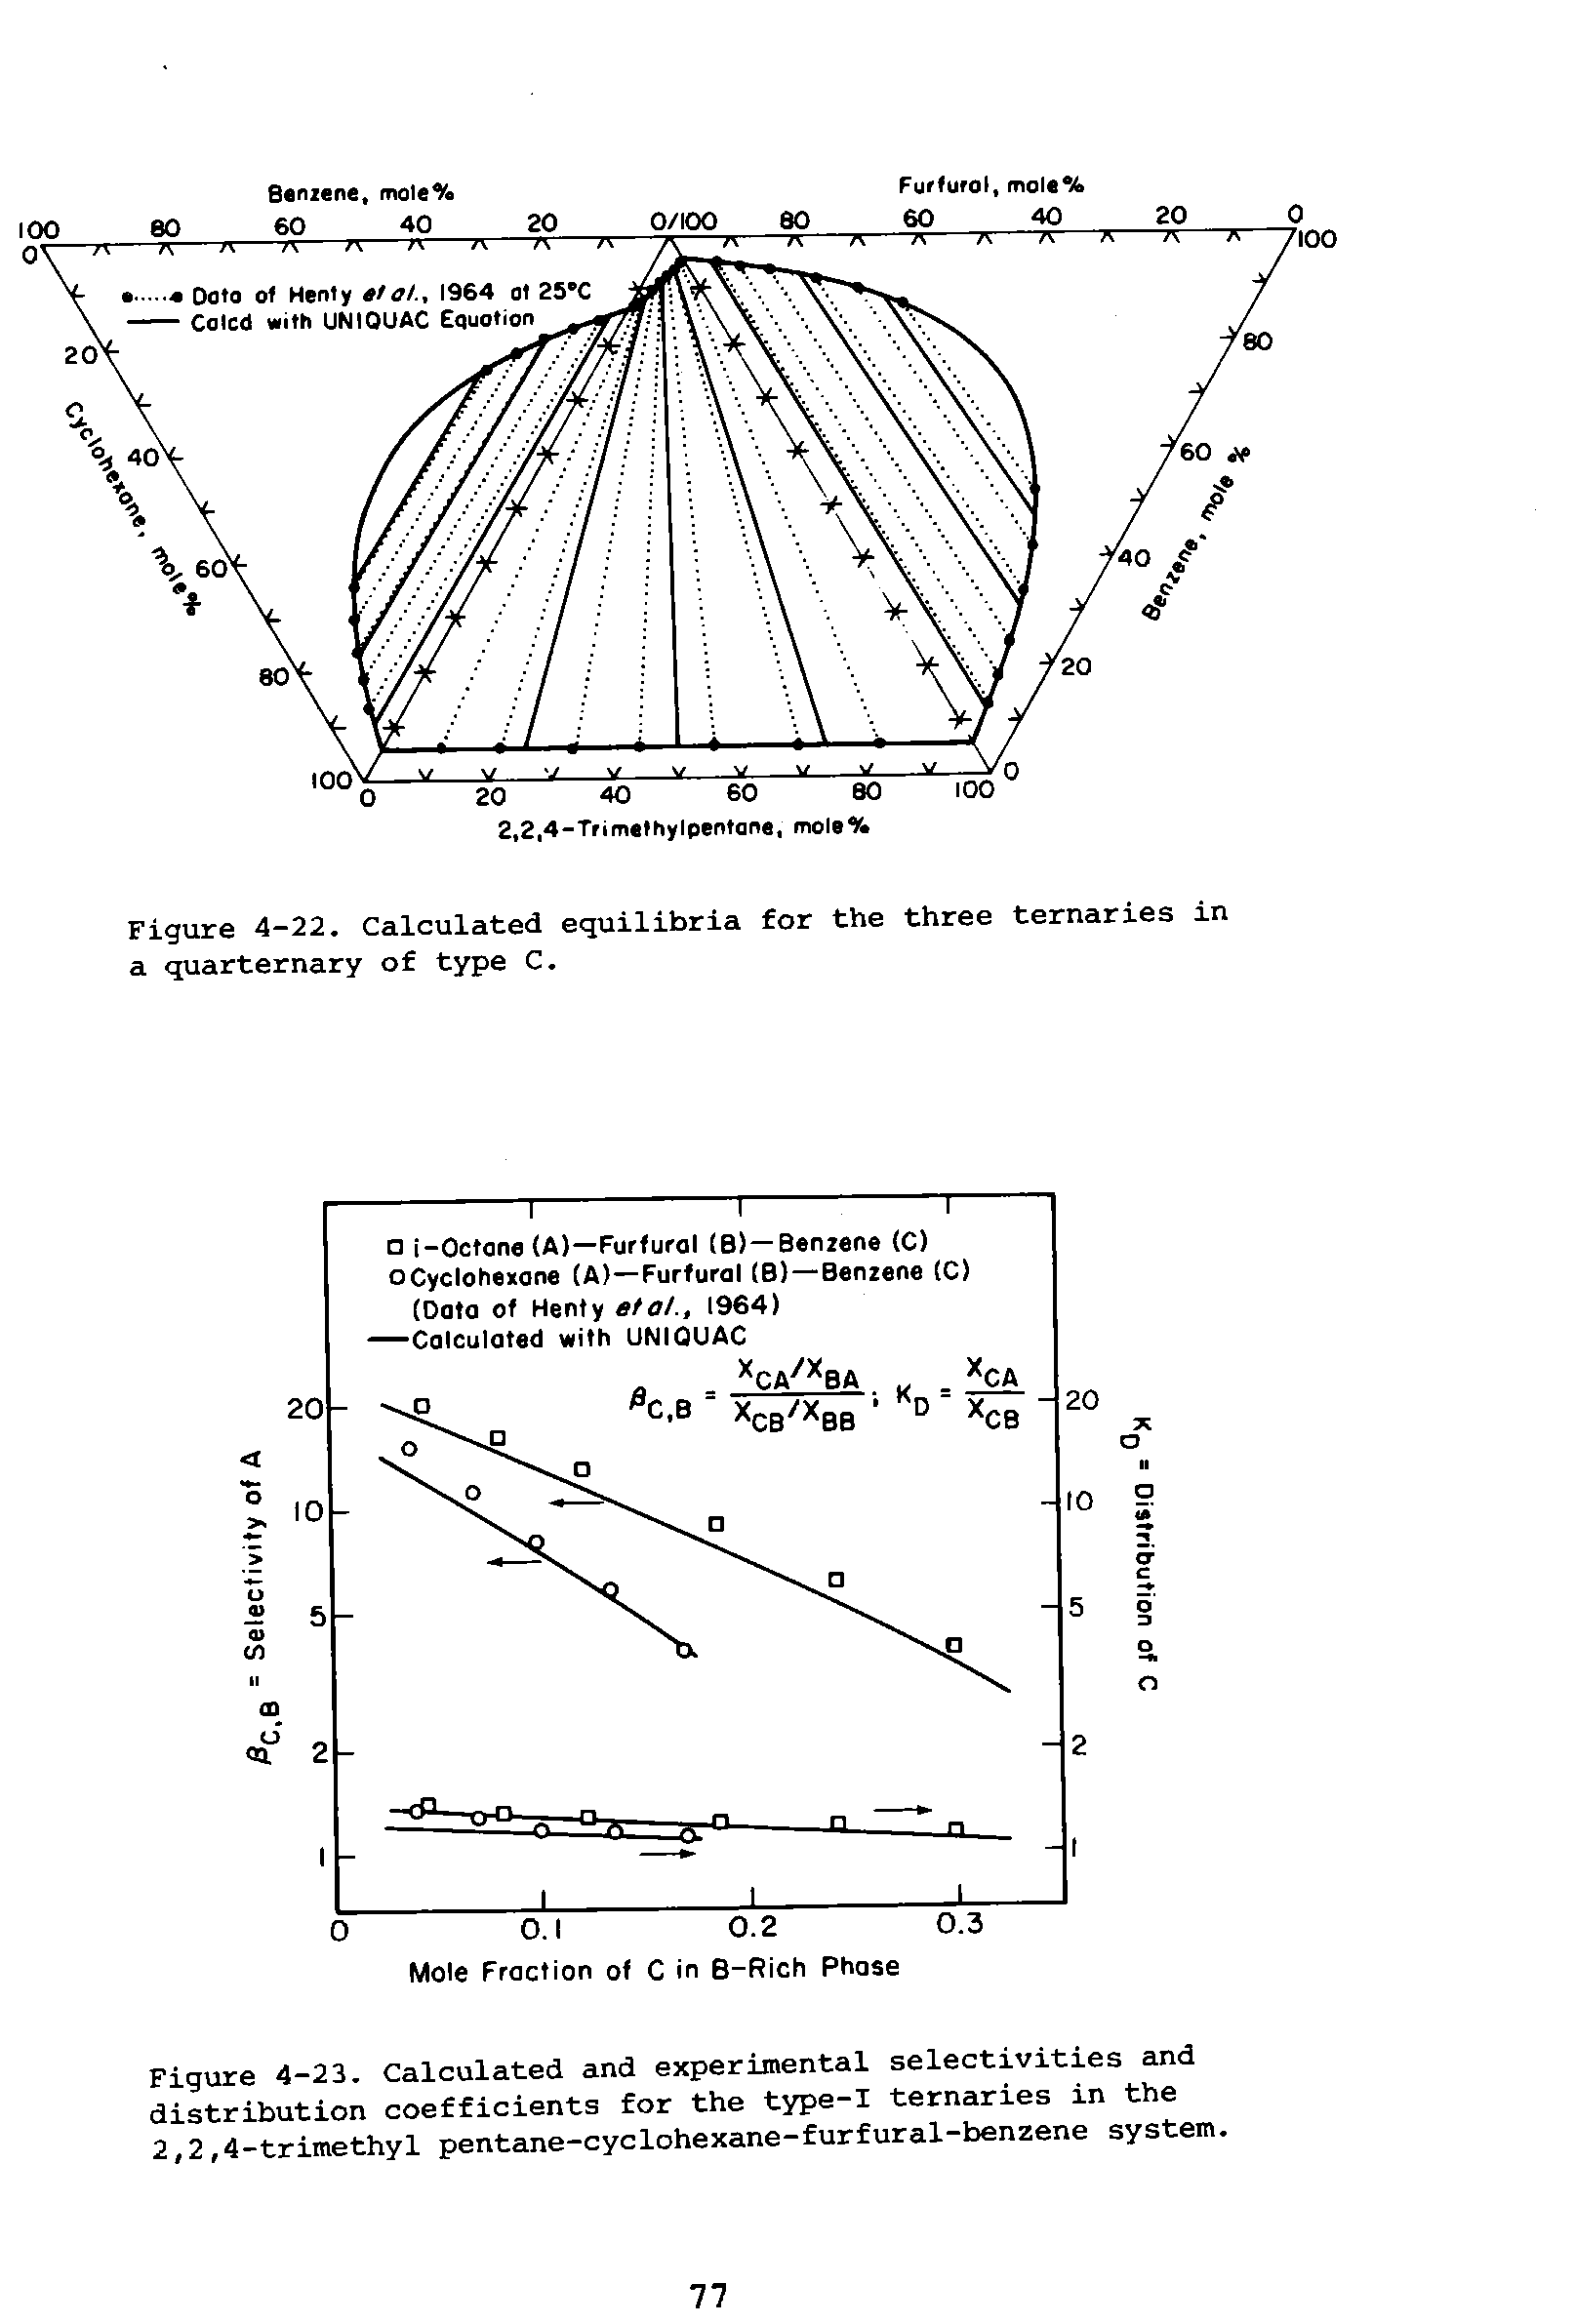 Figure 4-23. Calculated and experimental selectivities and distribution coefficients for the type-I ternaries in the 2,2,4-trimethyl pentane-cyclohexane-furfural-benzene system.